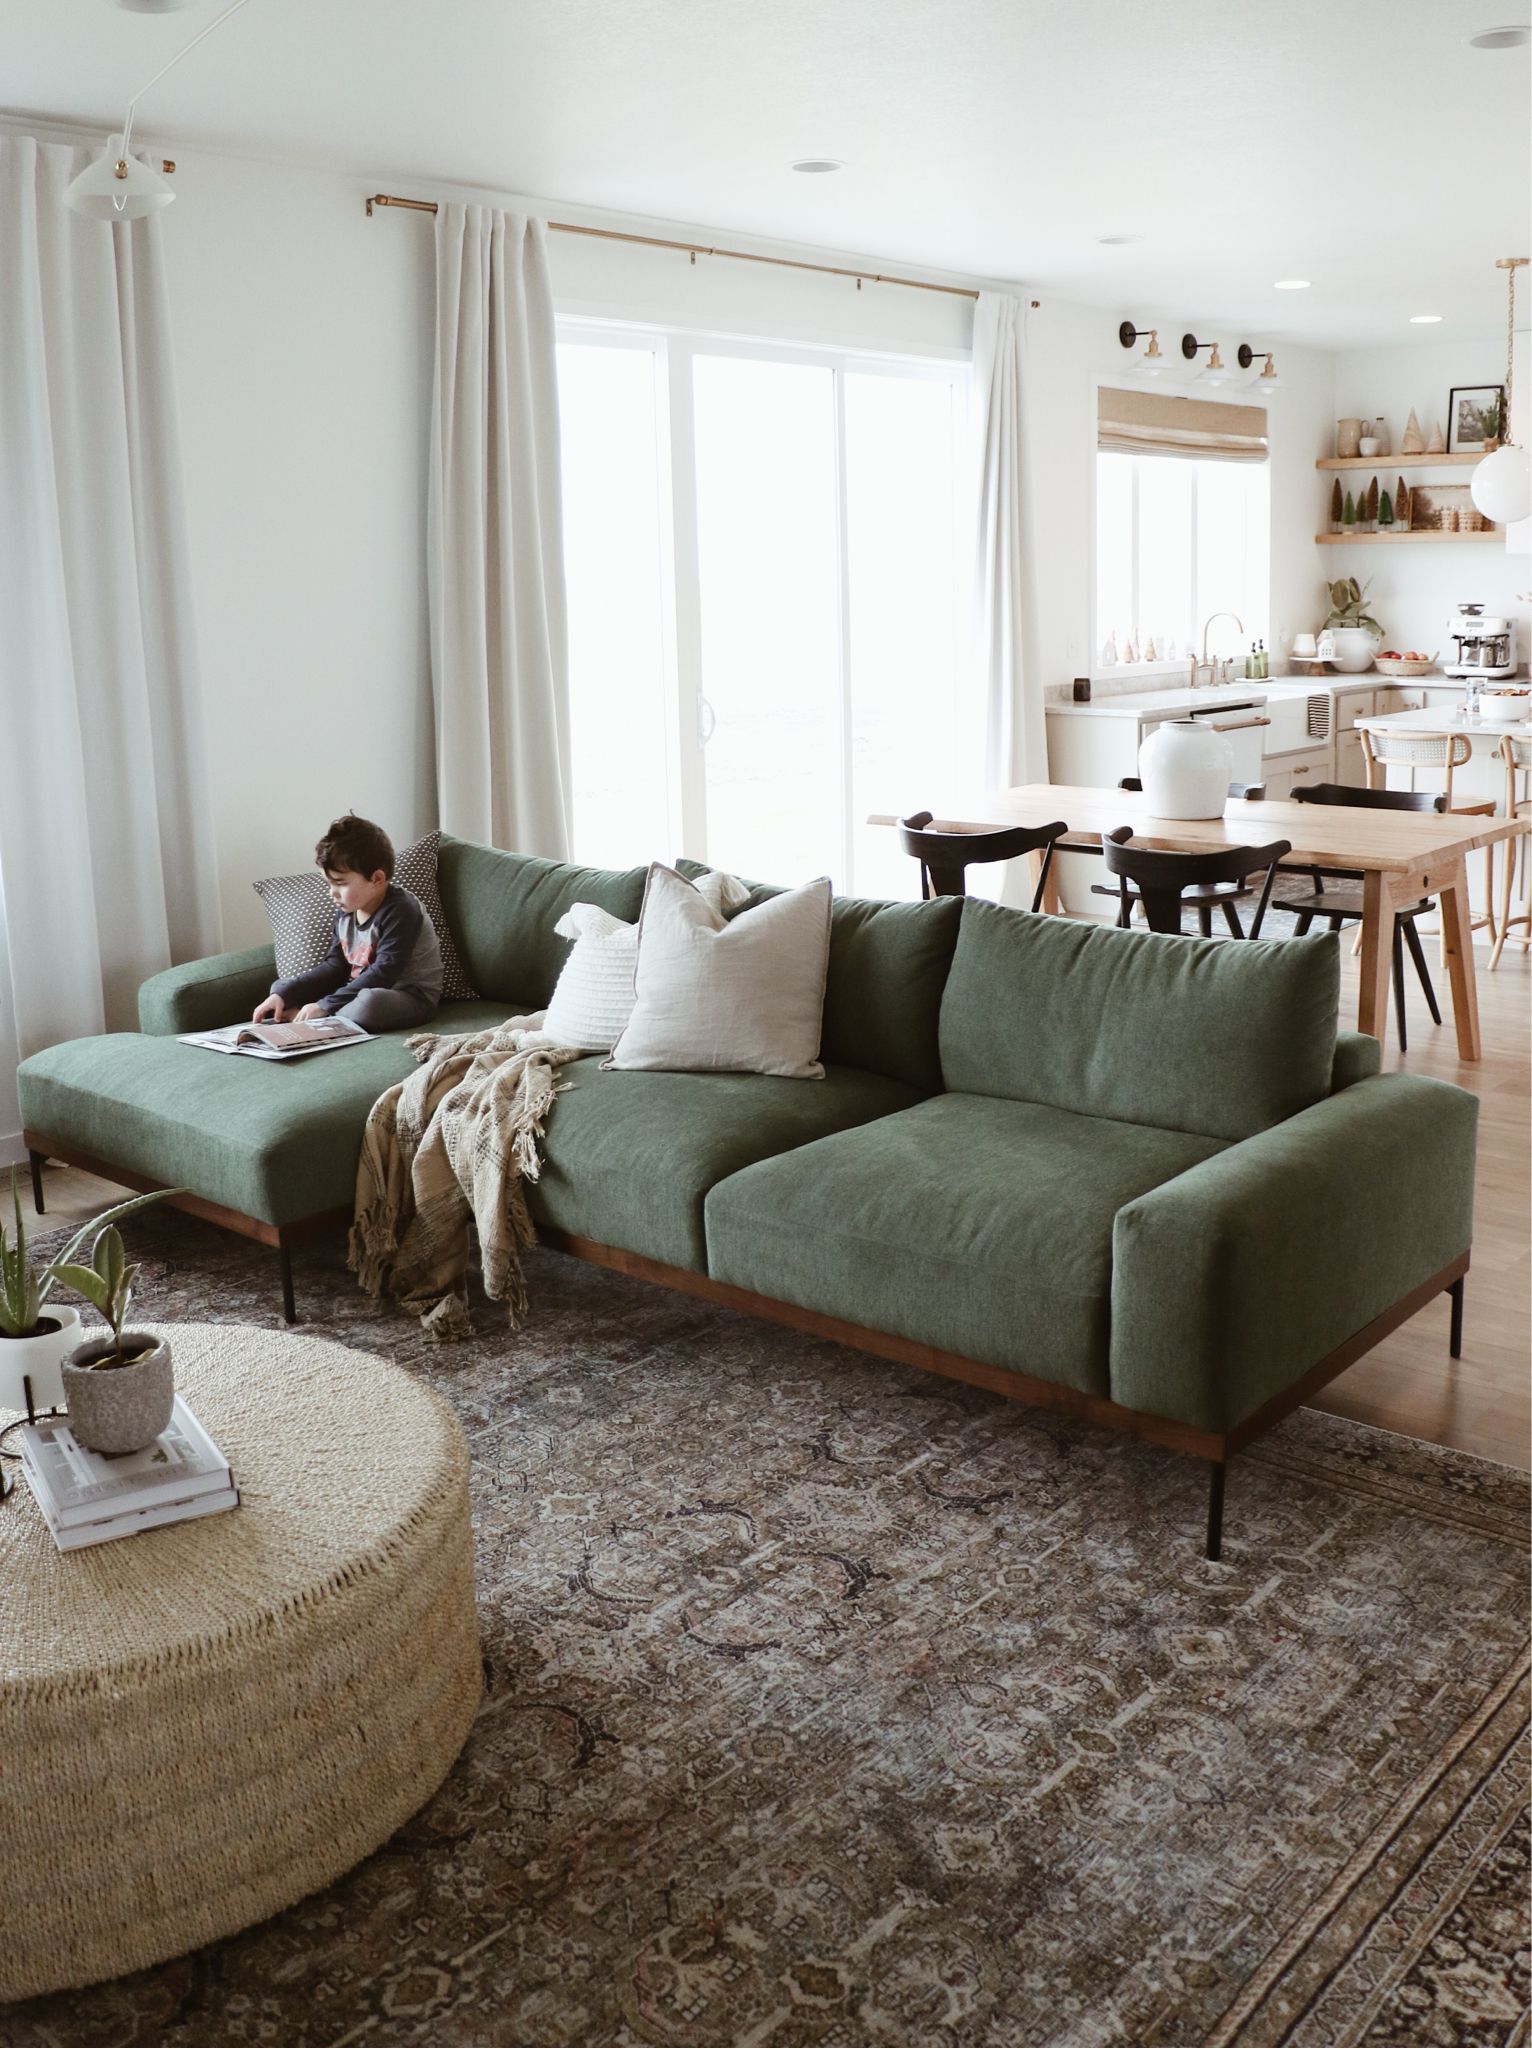 How to Incorporate a Green Sofa into Your
Living Room Decor